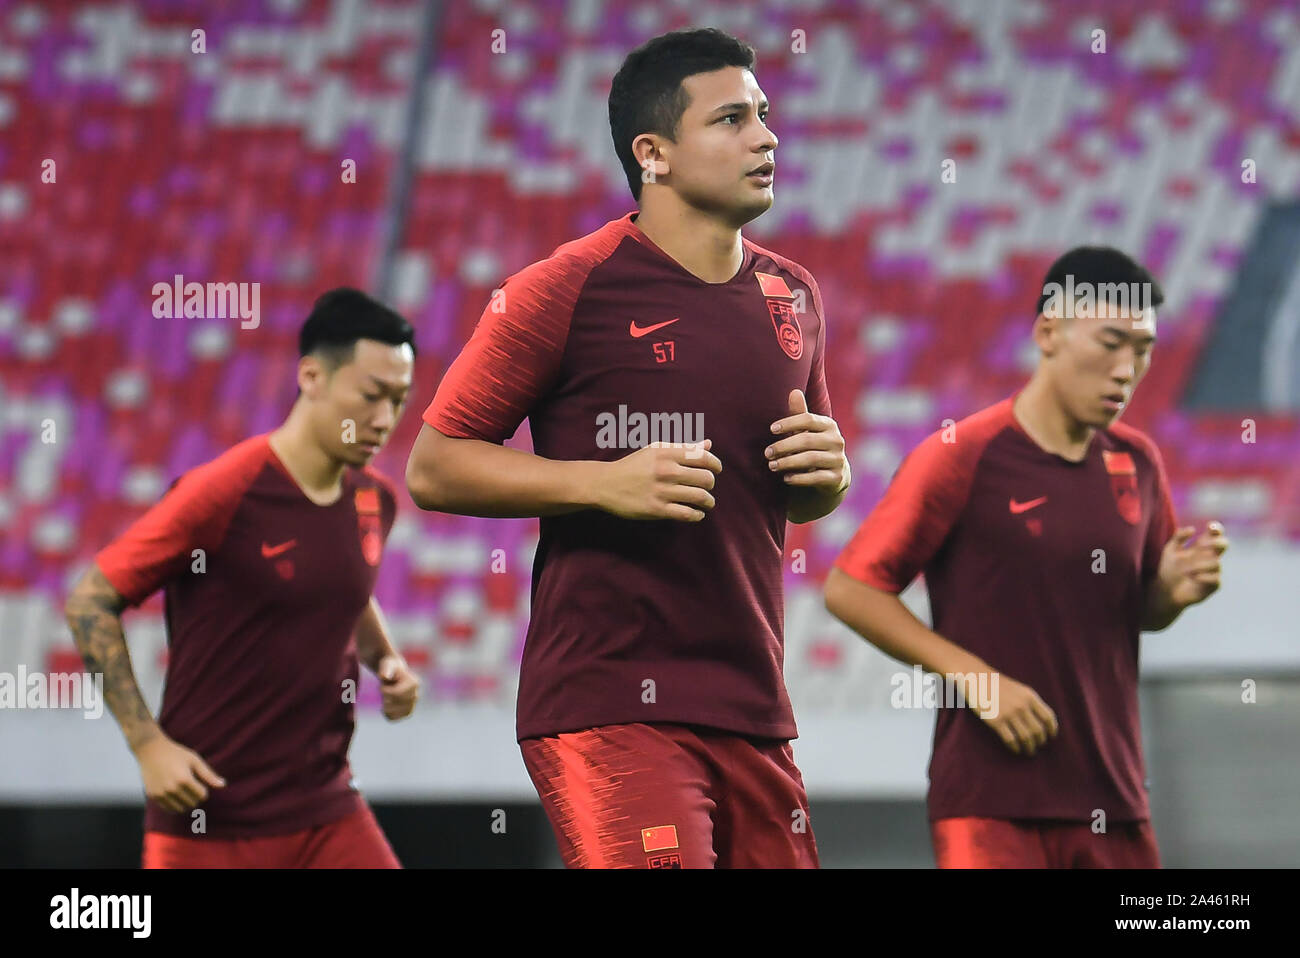 Brazilian-born Chinese football player Elkeson de Oliveira Cardoso, known as Elkeson, middle, receives traning for the Chinese National Football Team Stock Photo